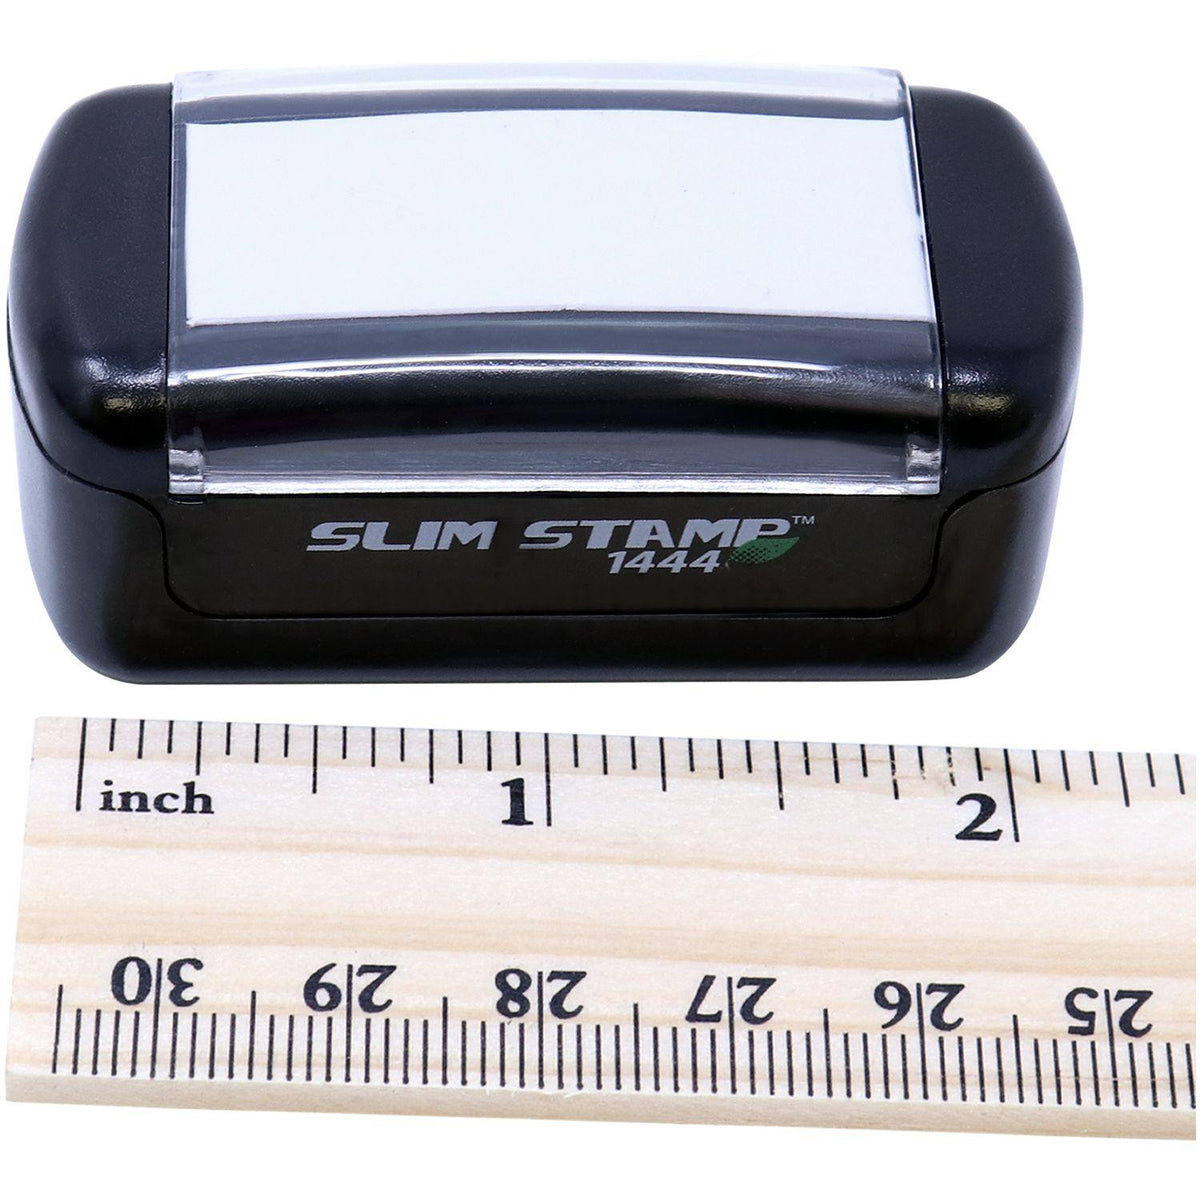 Measurement Slim Pre-Inked Temporarily Closed Stamp with Ruler